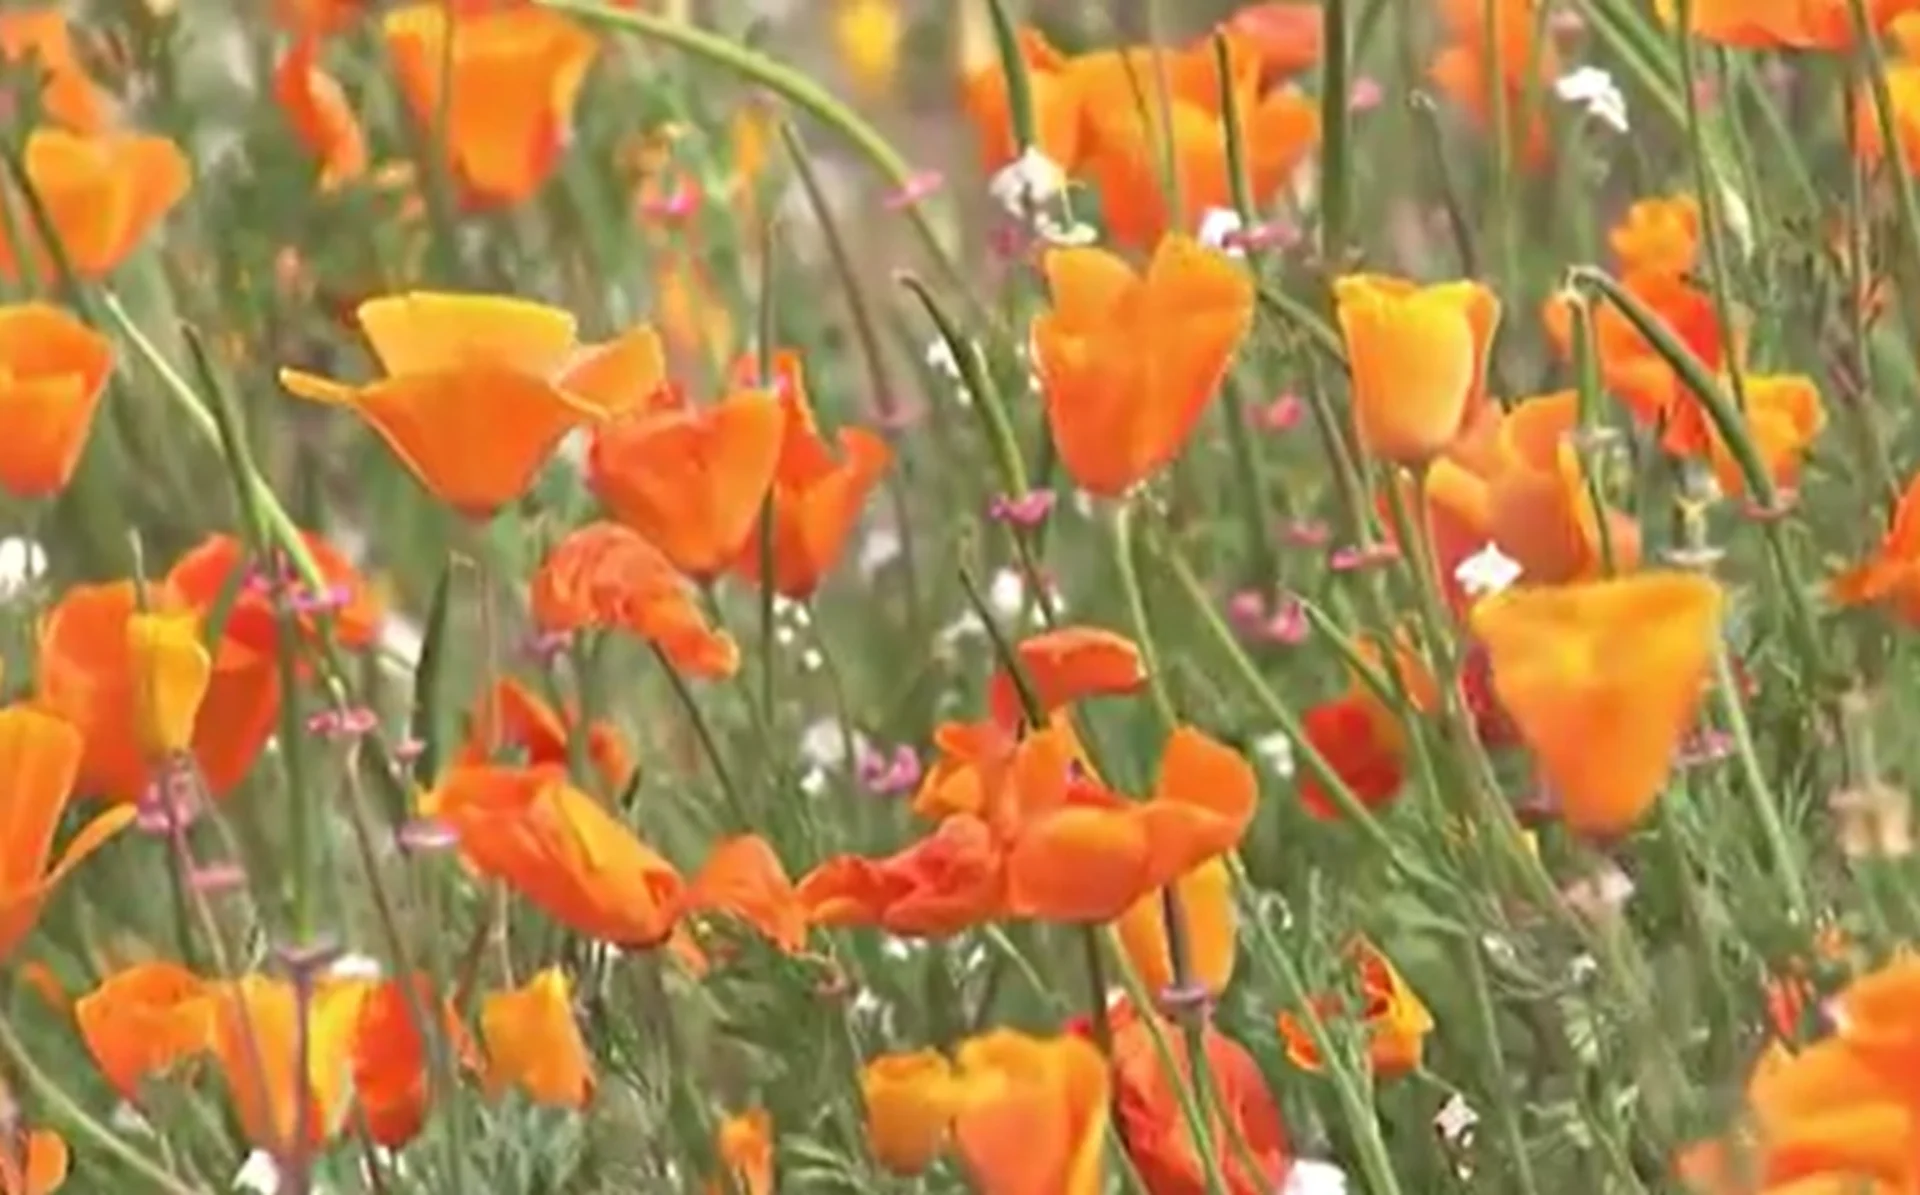 California superbloom emerges following extremely wet winter